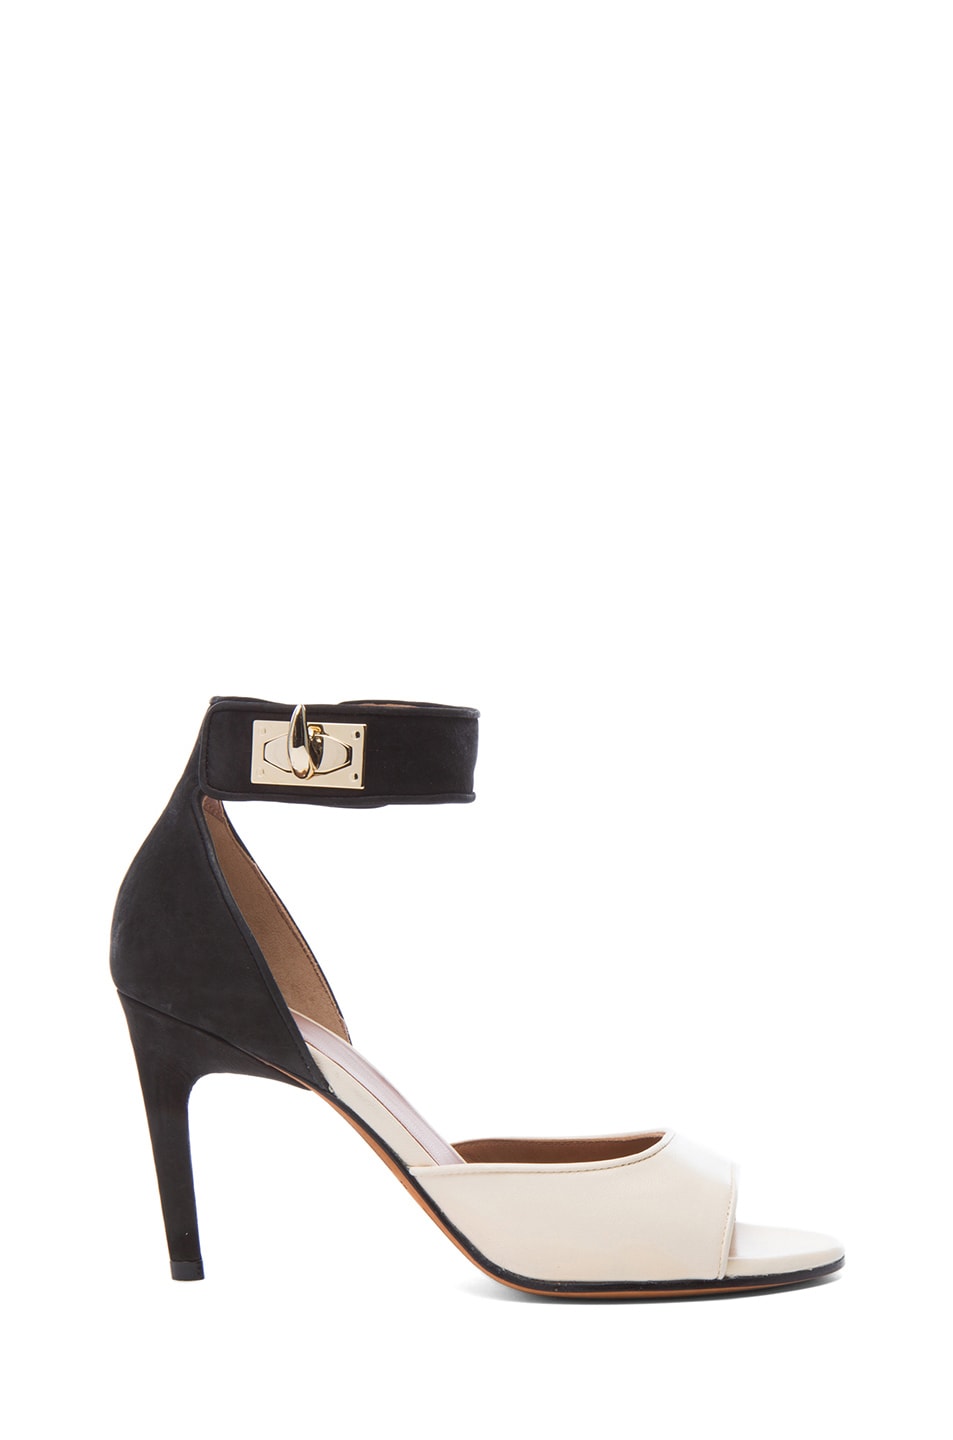 Image 1 of Givenchy Shark Lock Suede & Leather Sandals in Black & Beige